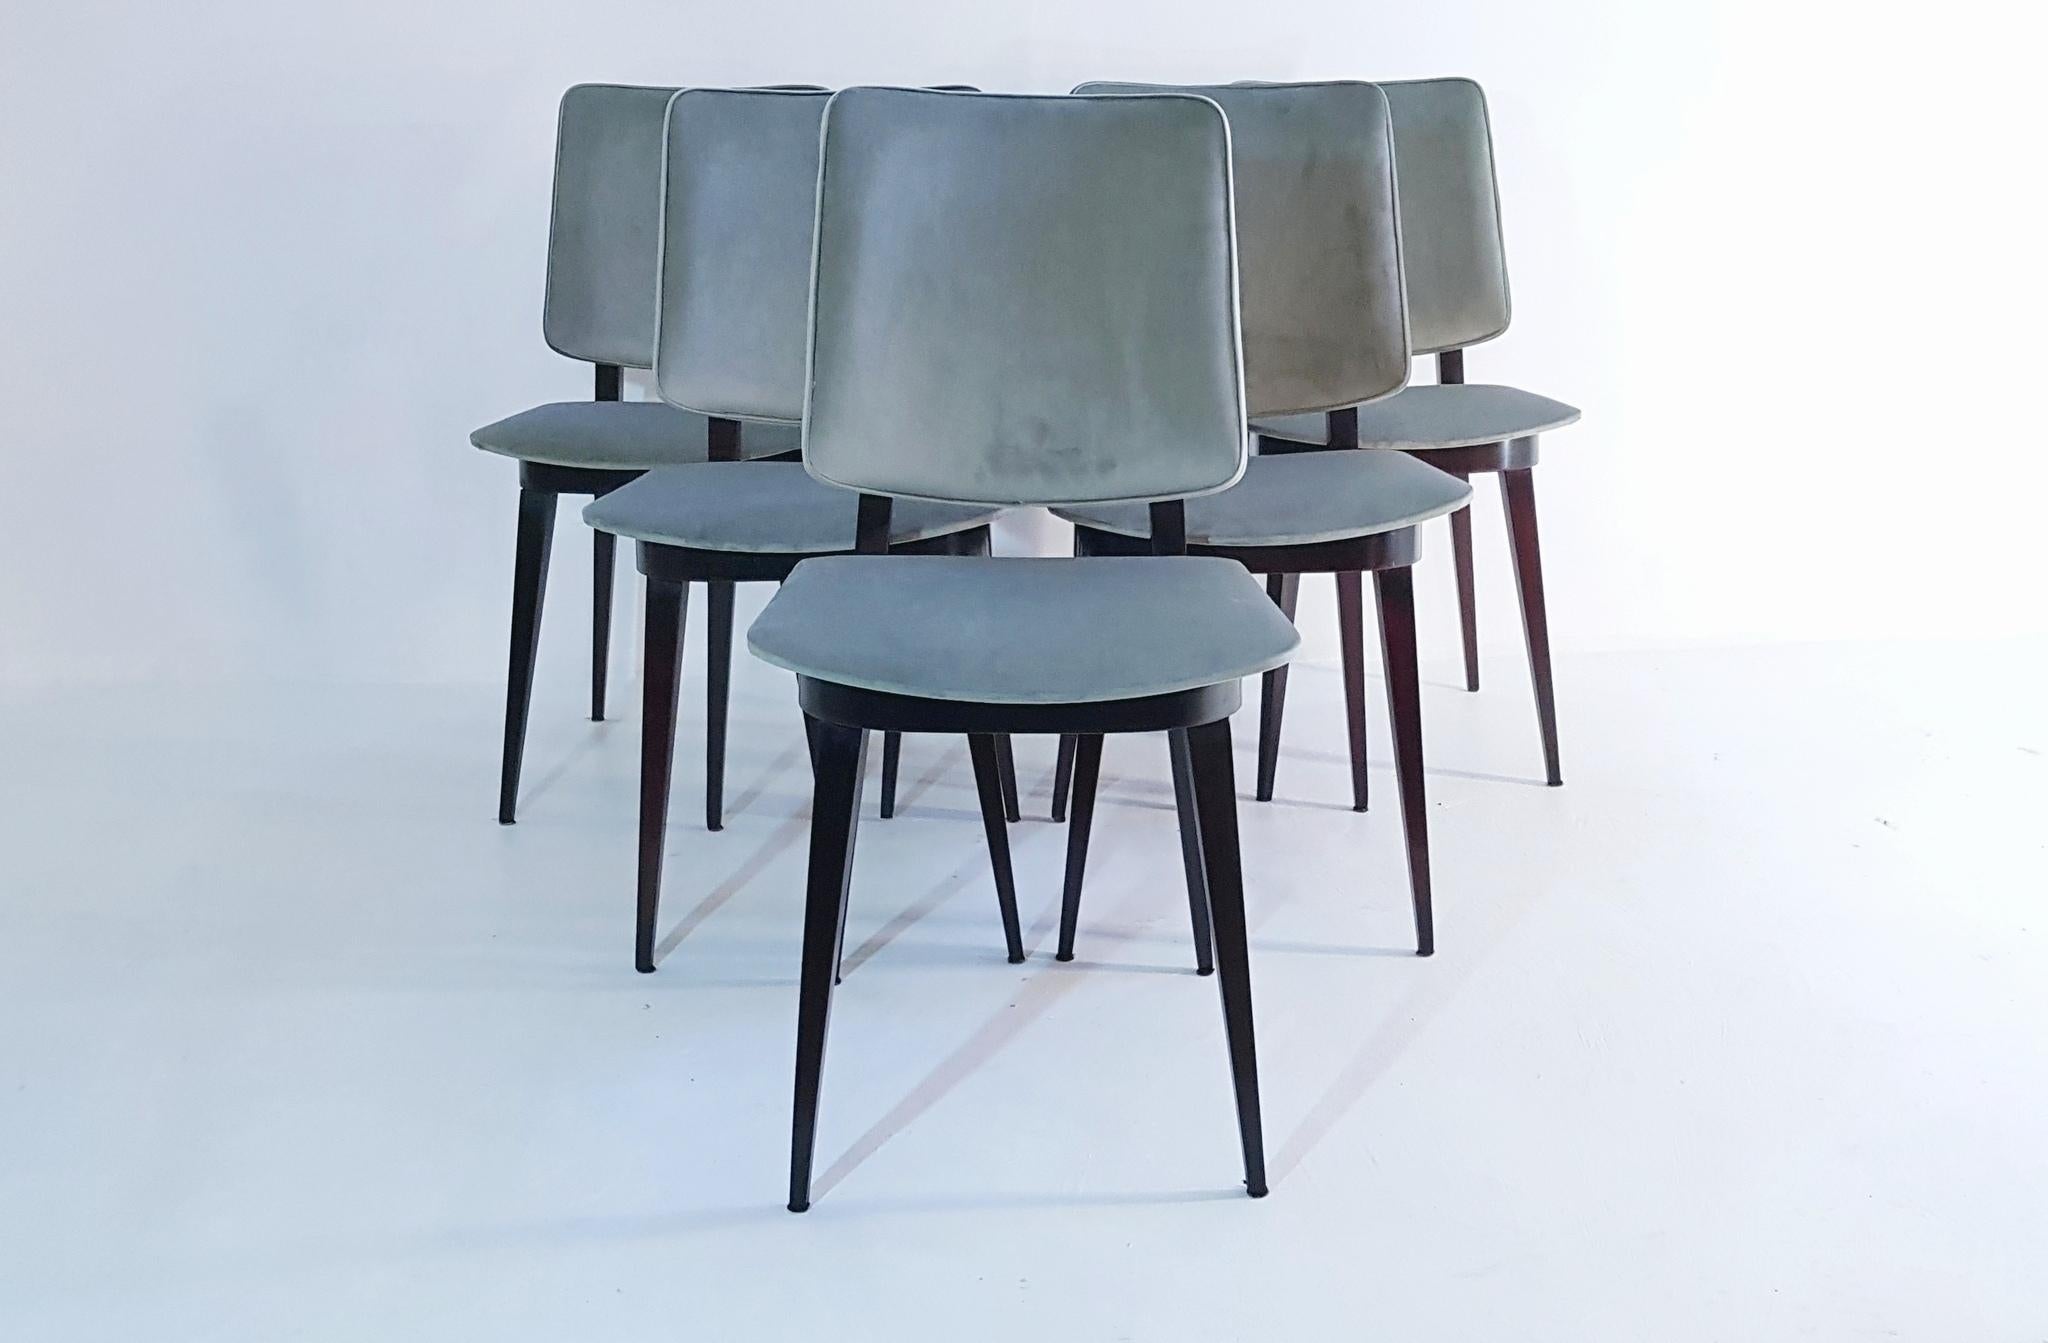 A set of six dining chairs in stained ebony colored wood. With seats and backrests covered in a brand new pastel /jade green velvet which is very durable and easy to clean from stains. A very clean design without any extra fuss or decor.

These